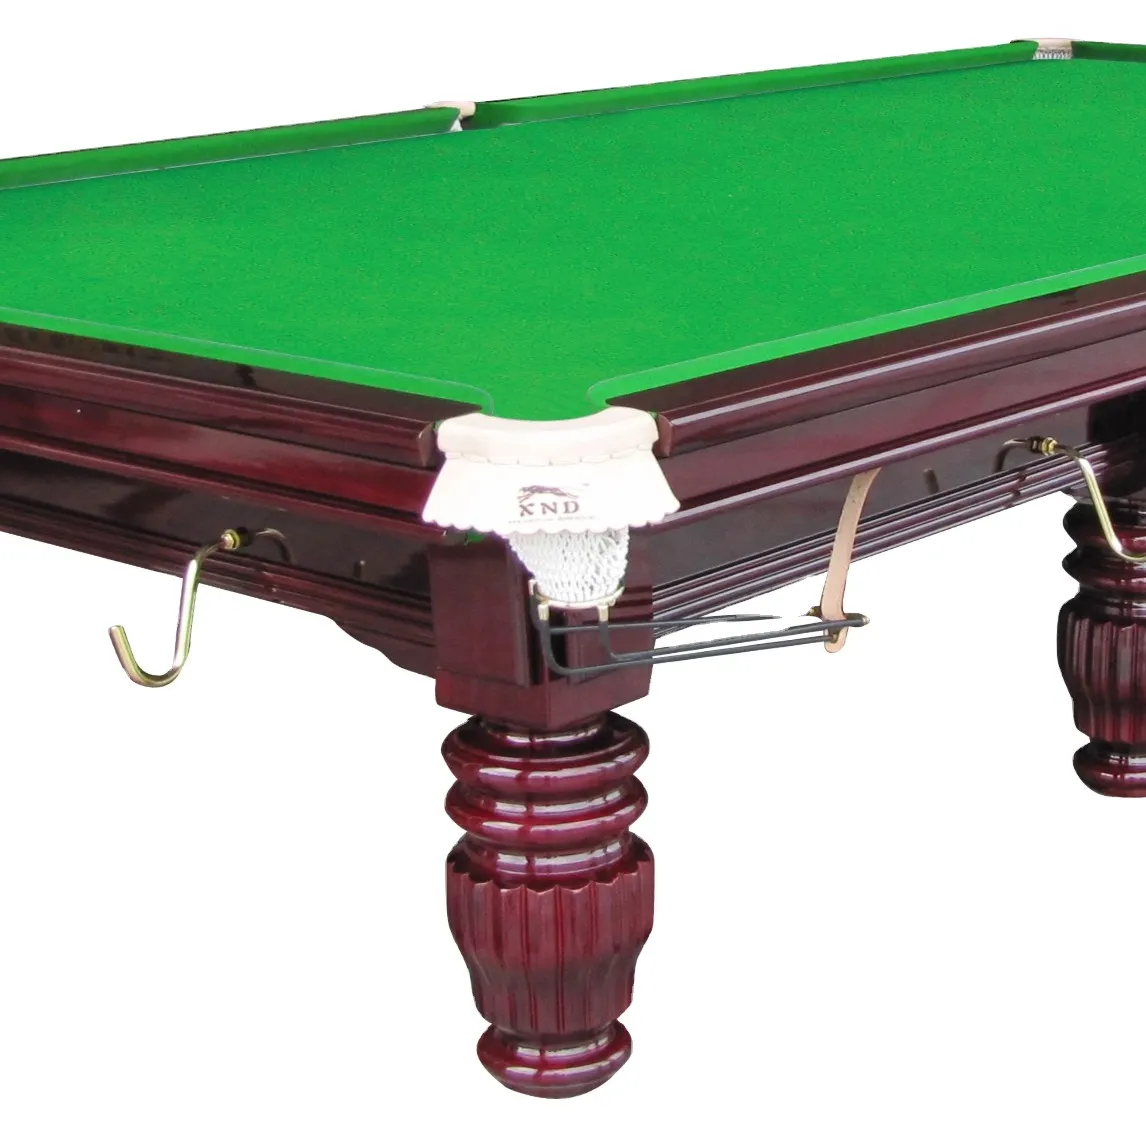 Snooker Billiards Table Qiao Style Silver Leg International Size Standard Adult Home Indoor English Slooker Billiards Table